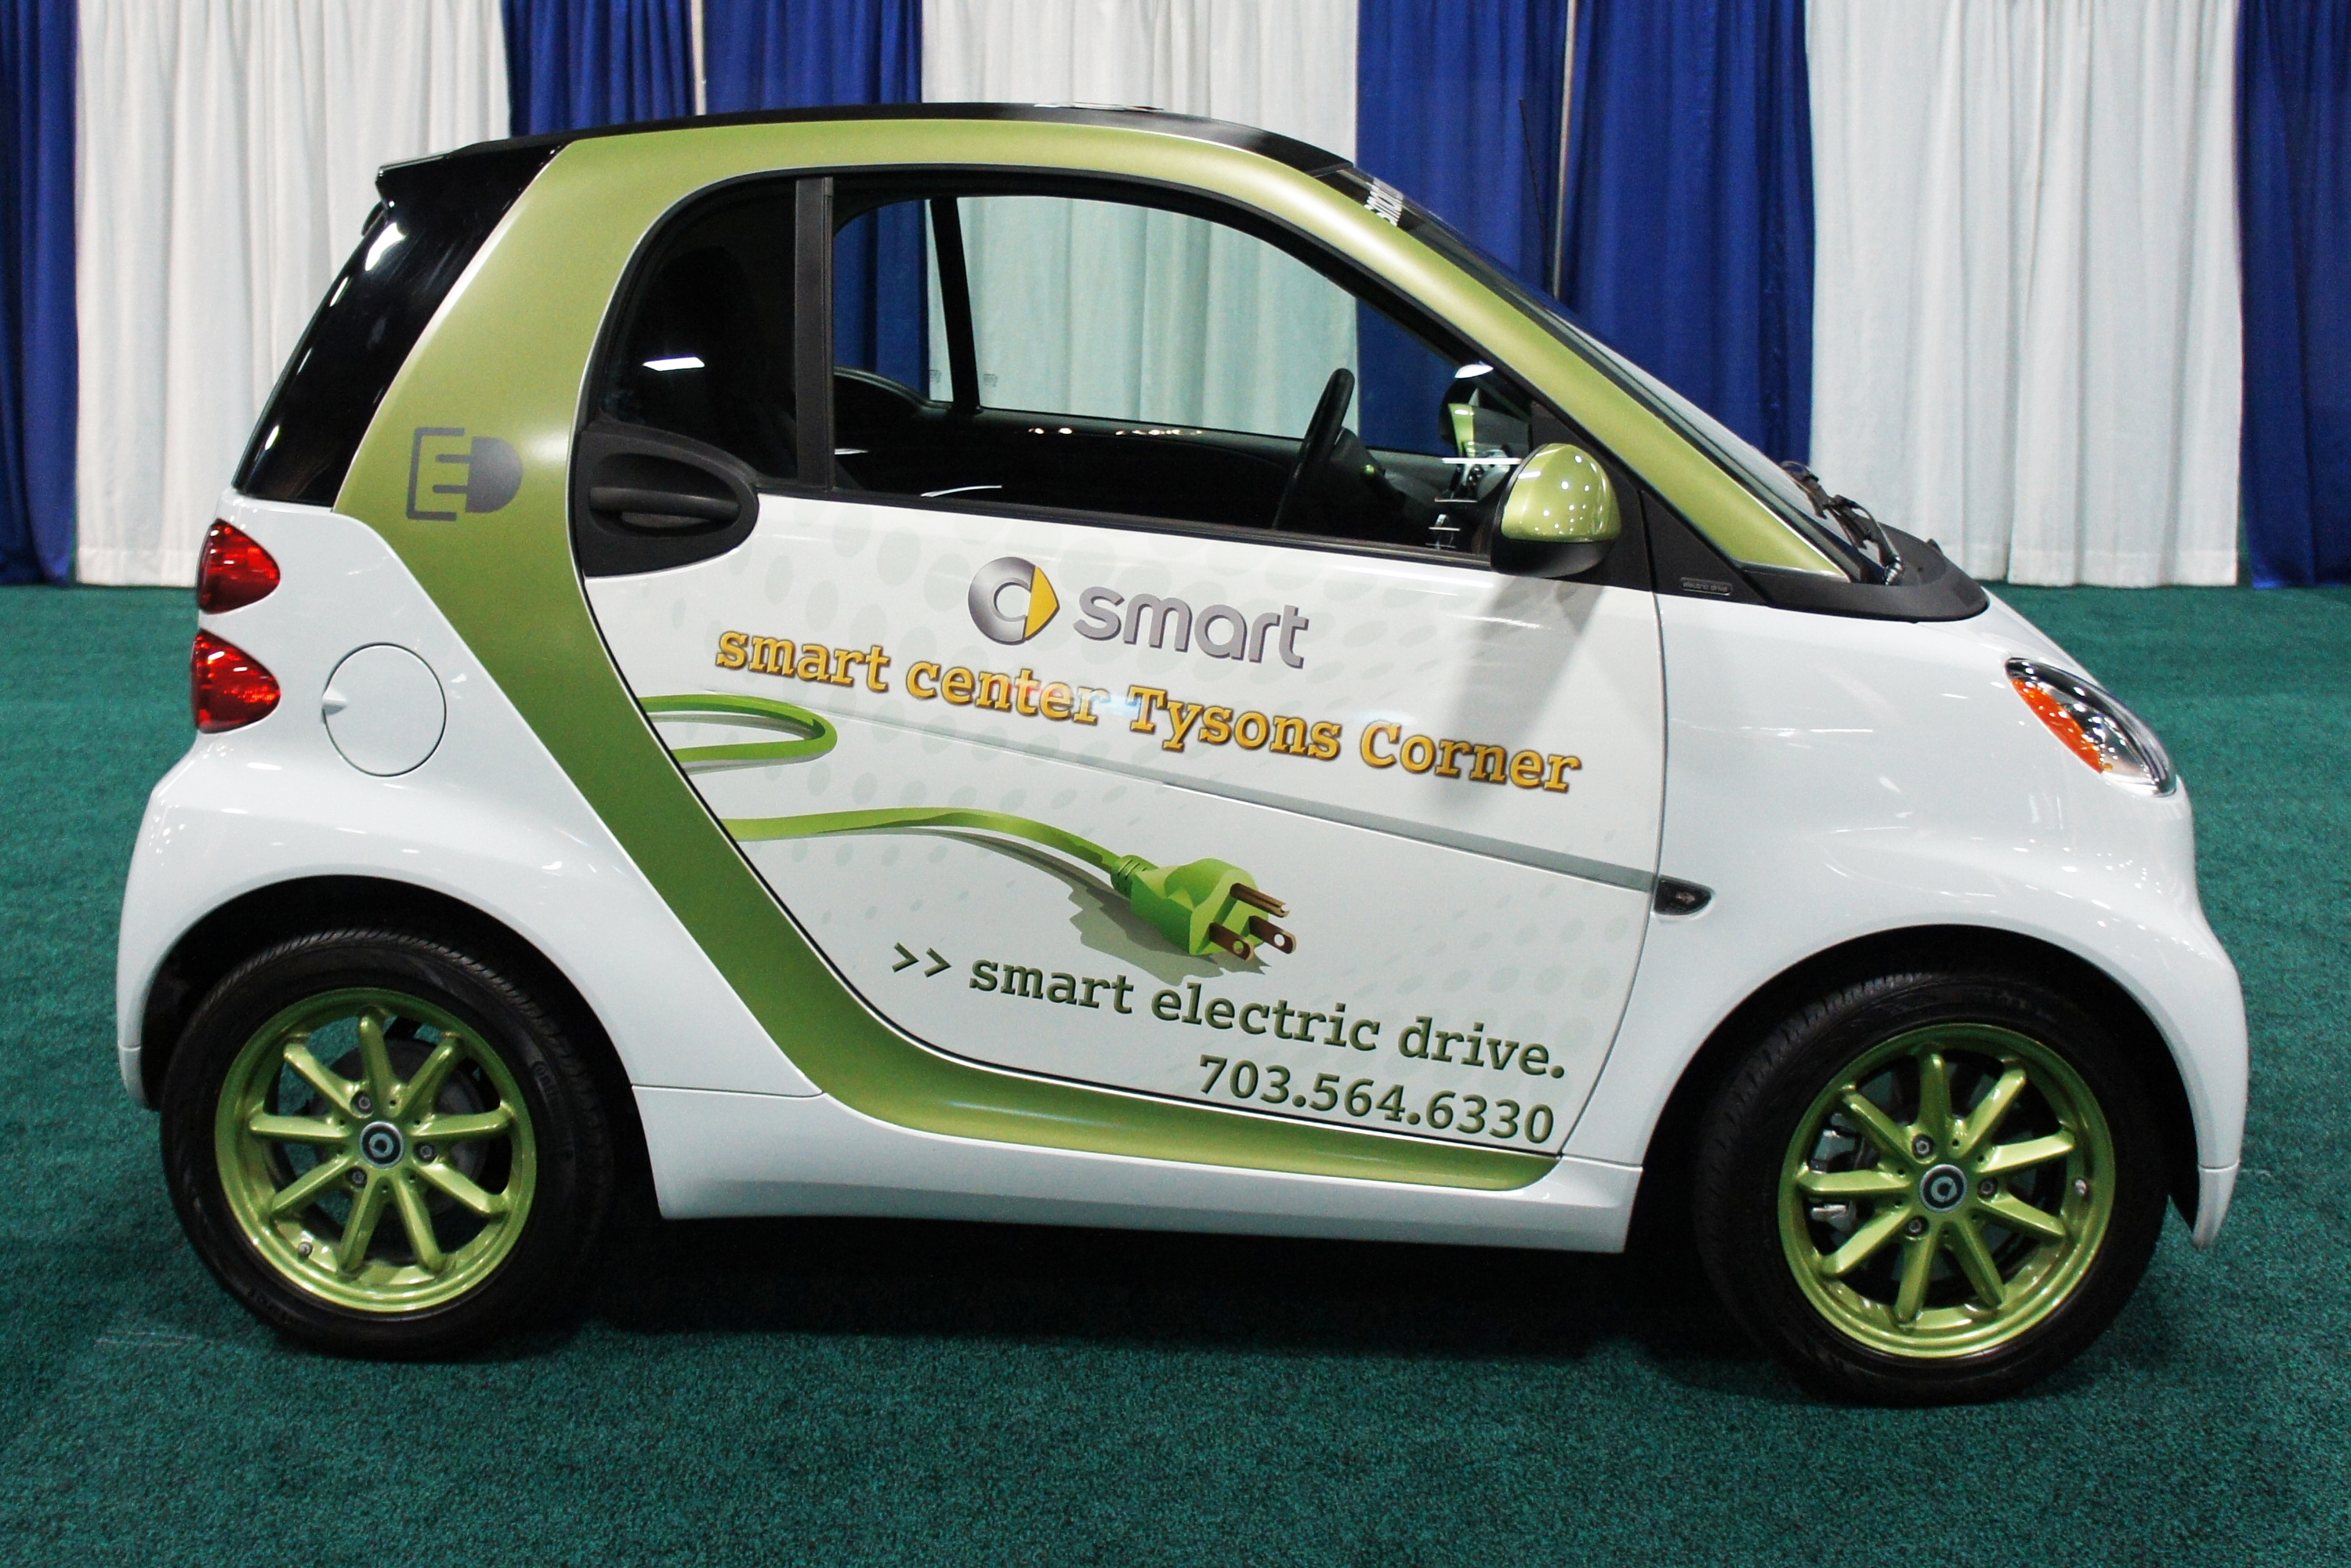 You can finally afford an electric car – For The Curious